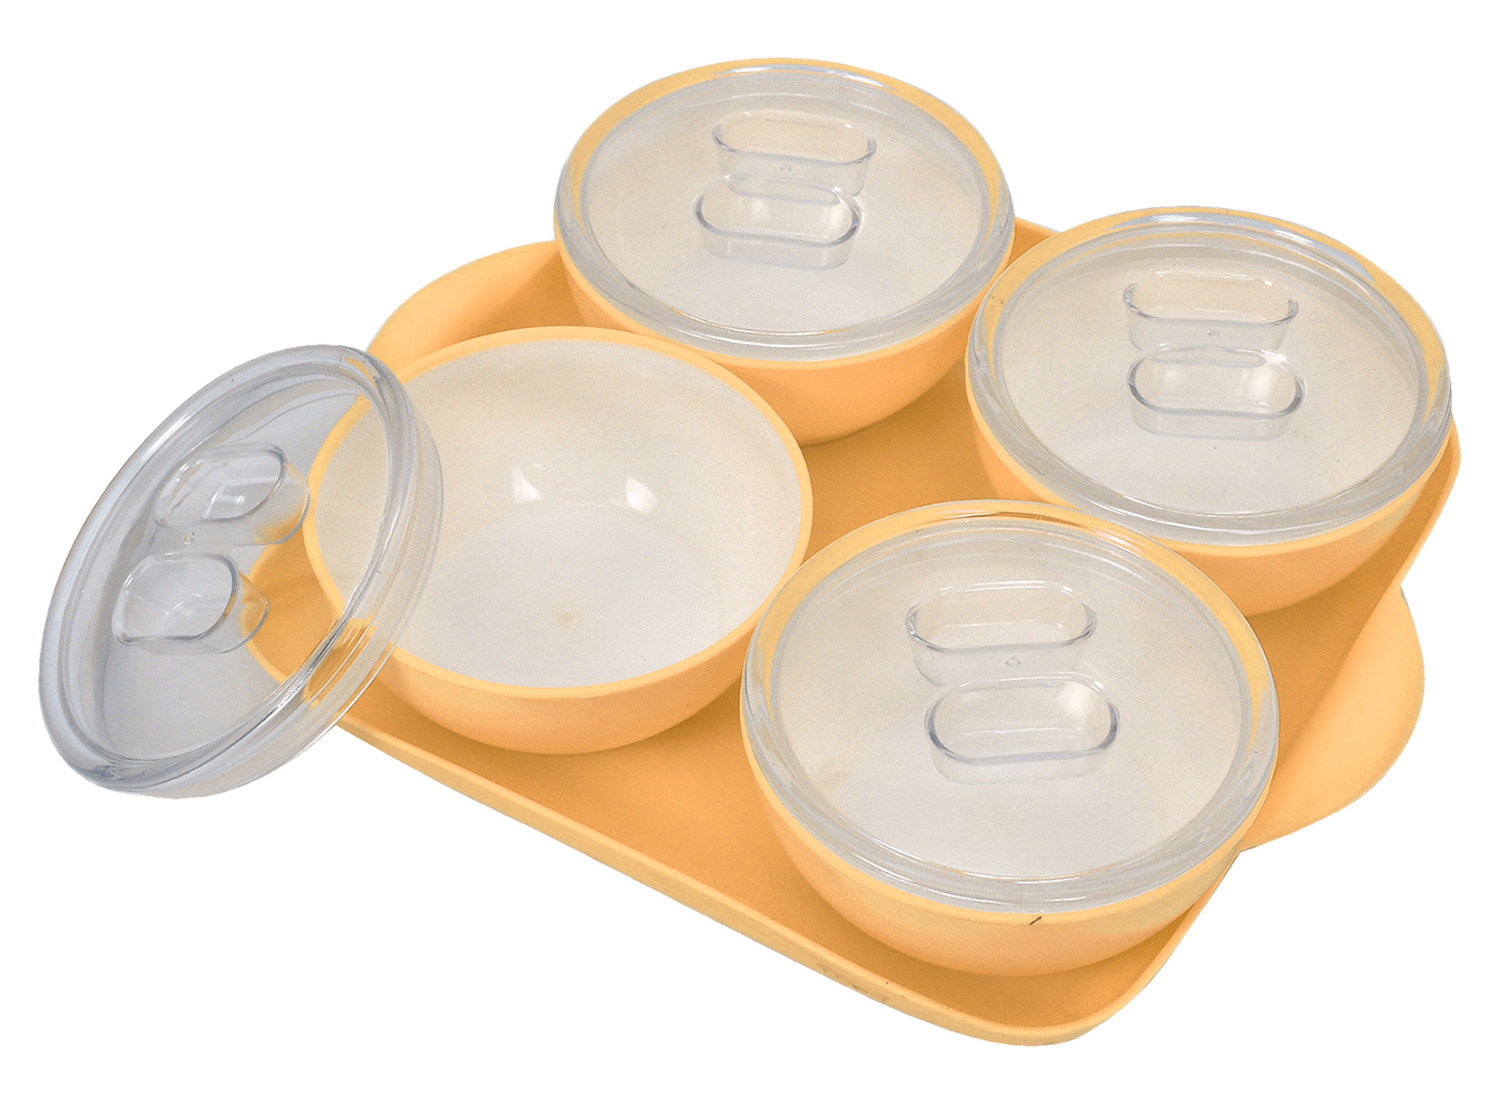 Kuber Industries Plastic 4 Bowls & 1 Square Tray Set For Serving & Store Dry Fruits, candies, Snacks With Silicon Rubberized Ring Lid (Autumn Orange)